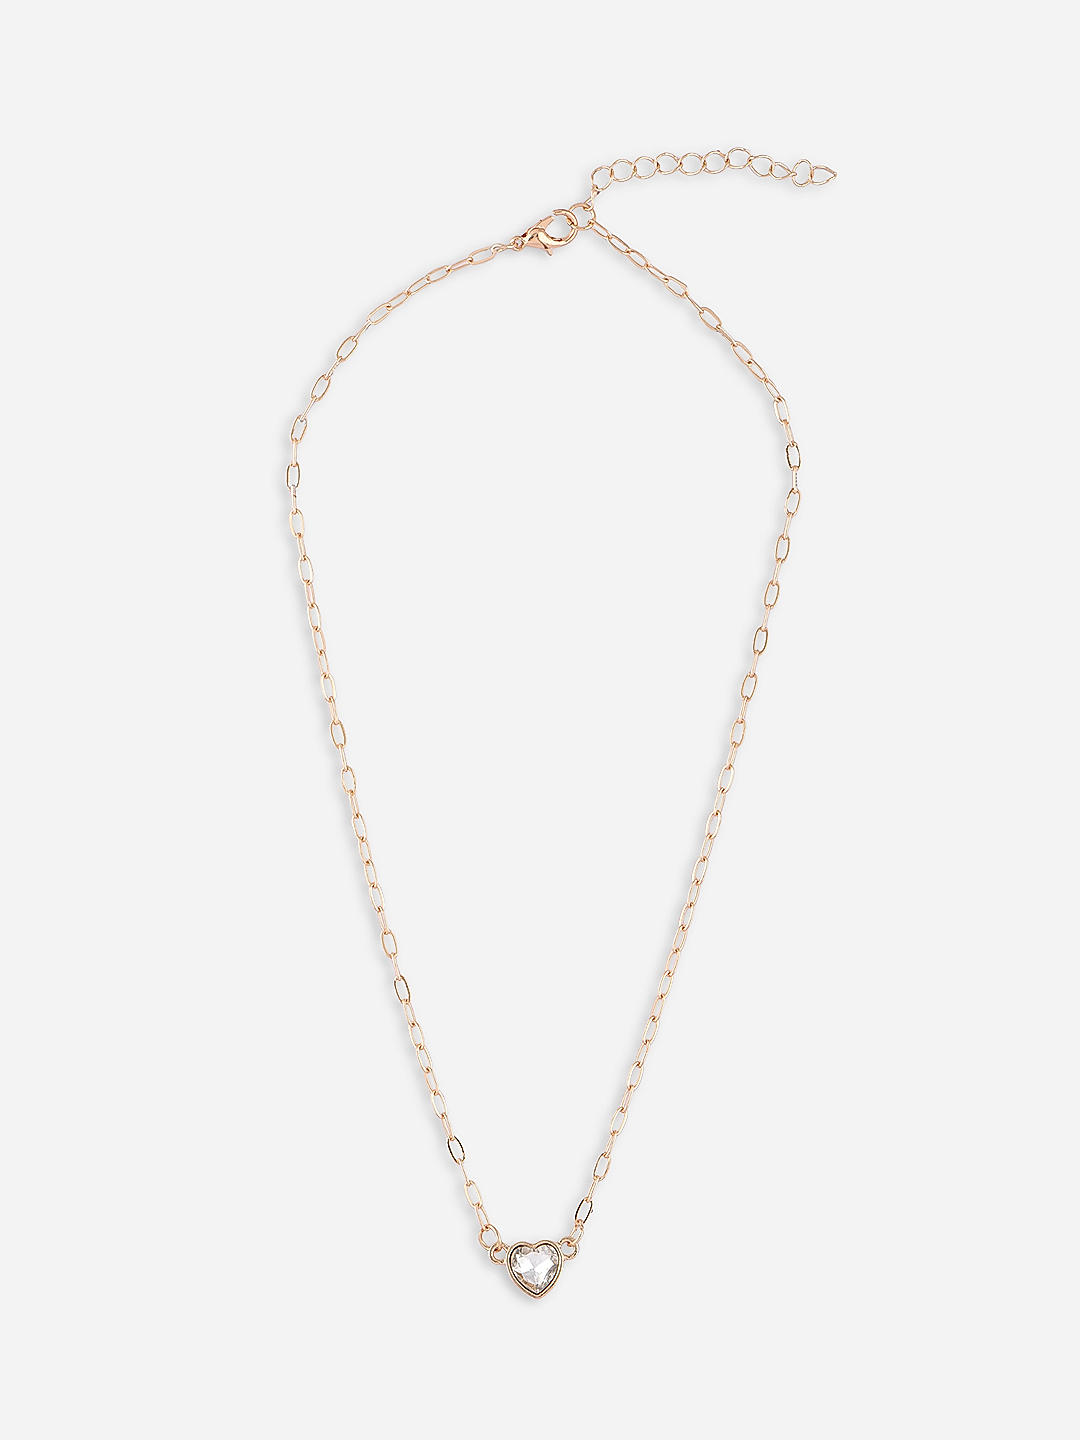 White Gold Necklace with a Diamond Bar | KLENOTA